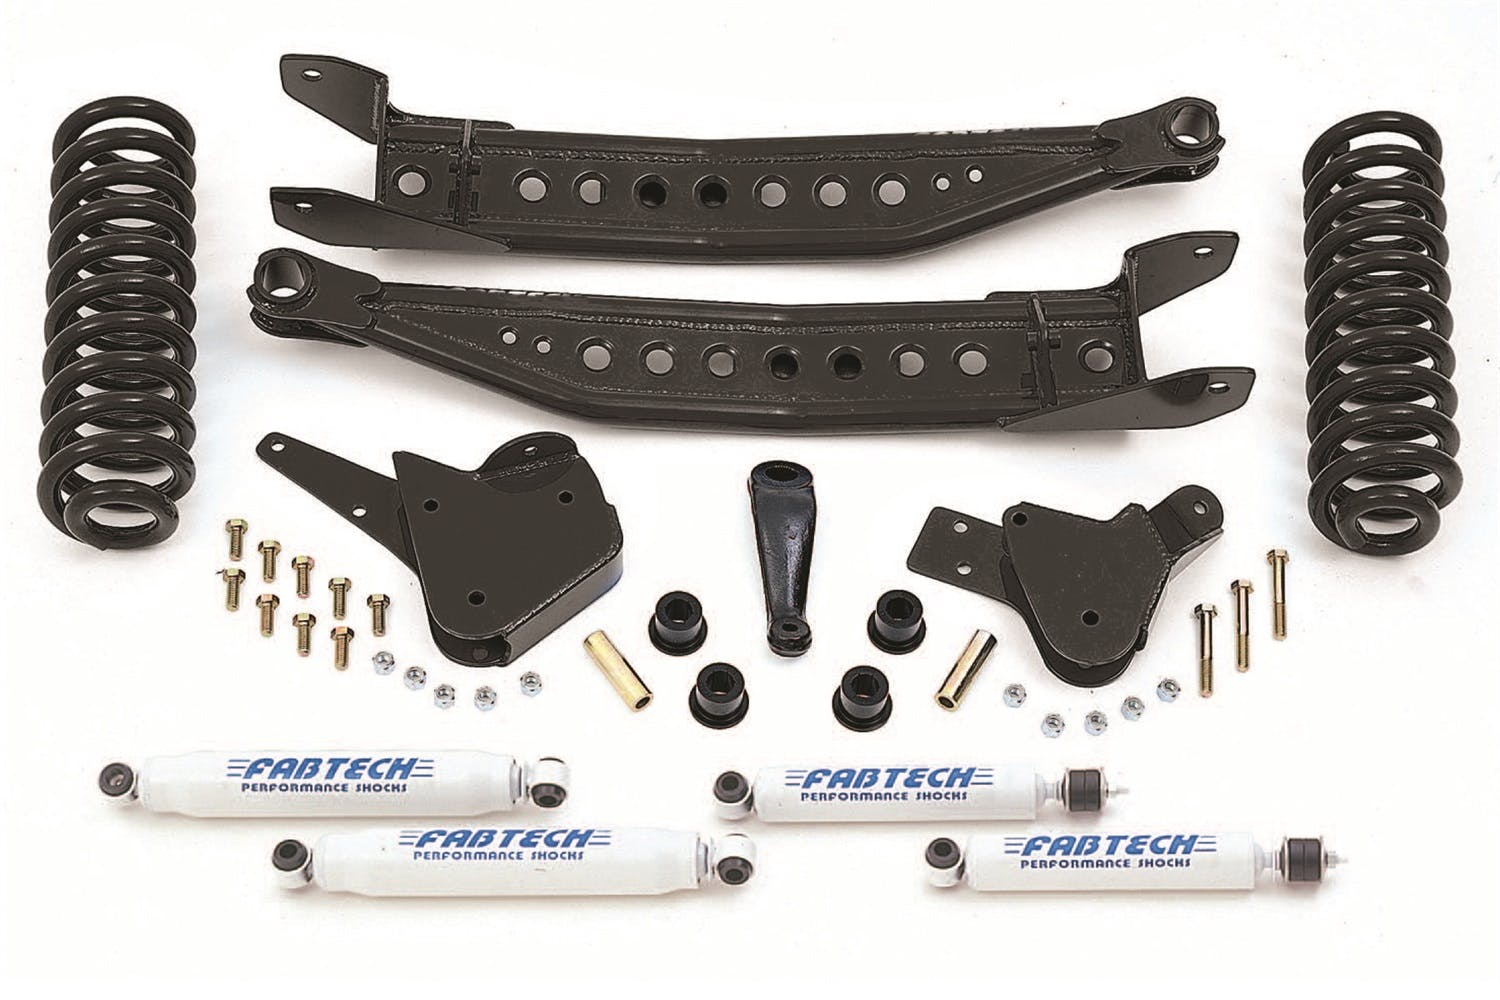 Fabtech K2103 6in. PERF SYS W/PERF SHKS 99-00 FORD F250/350 2WD W/7.3L DIESEL